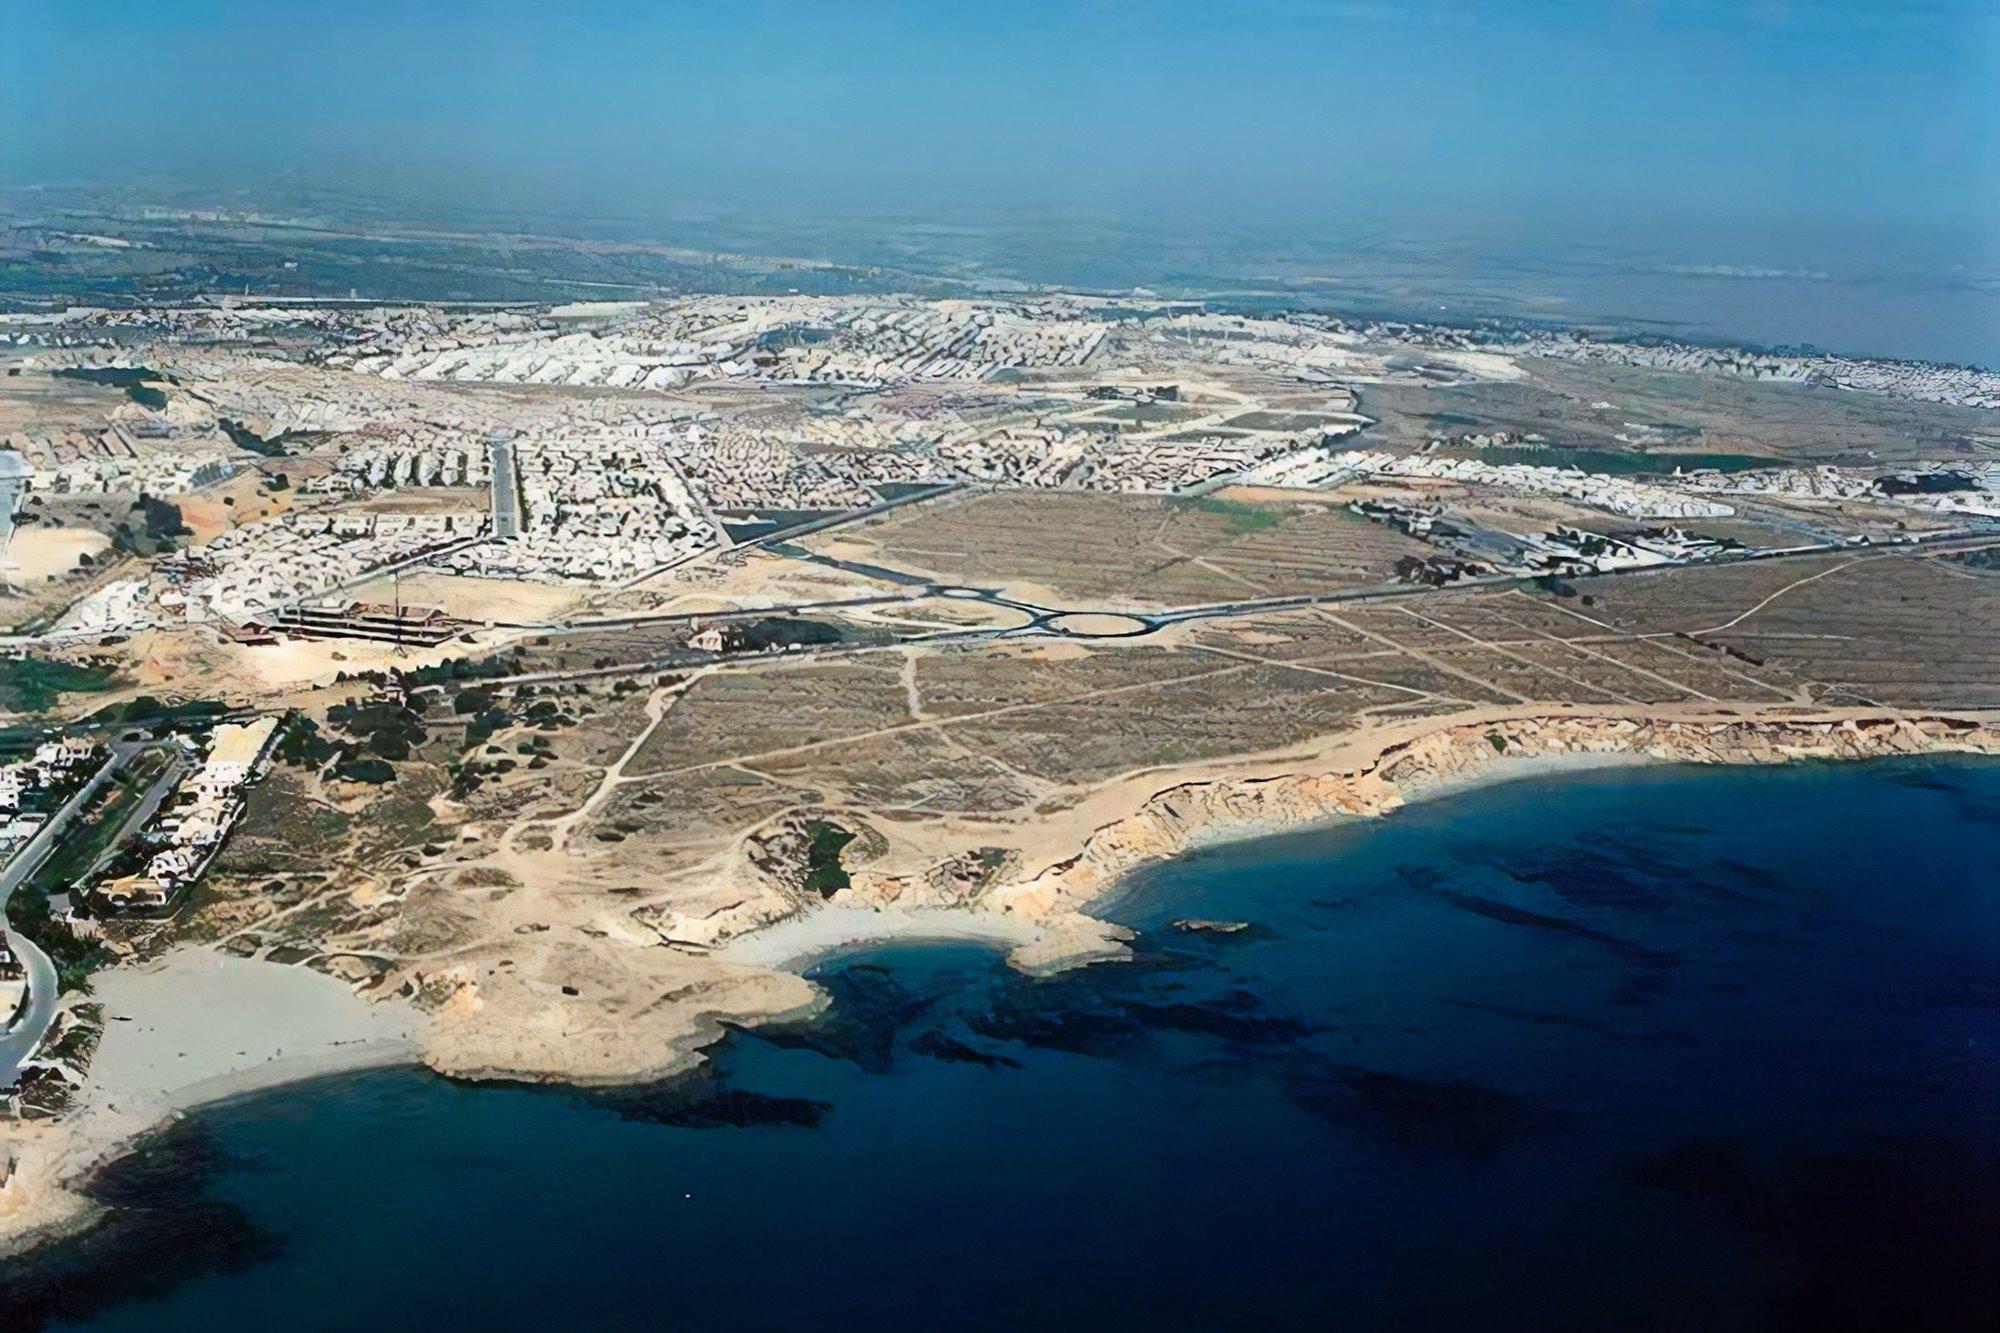 Controversial Housing Project Gets Go Ahead On 'empty' Stretch Of The Costa Blanca In Spain